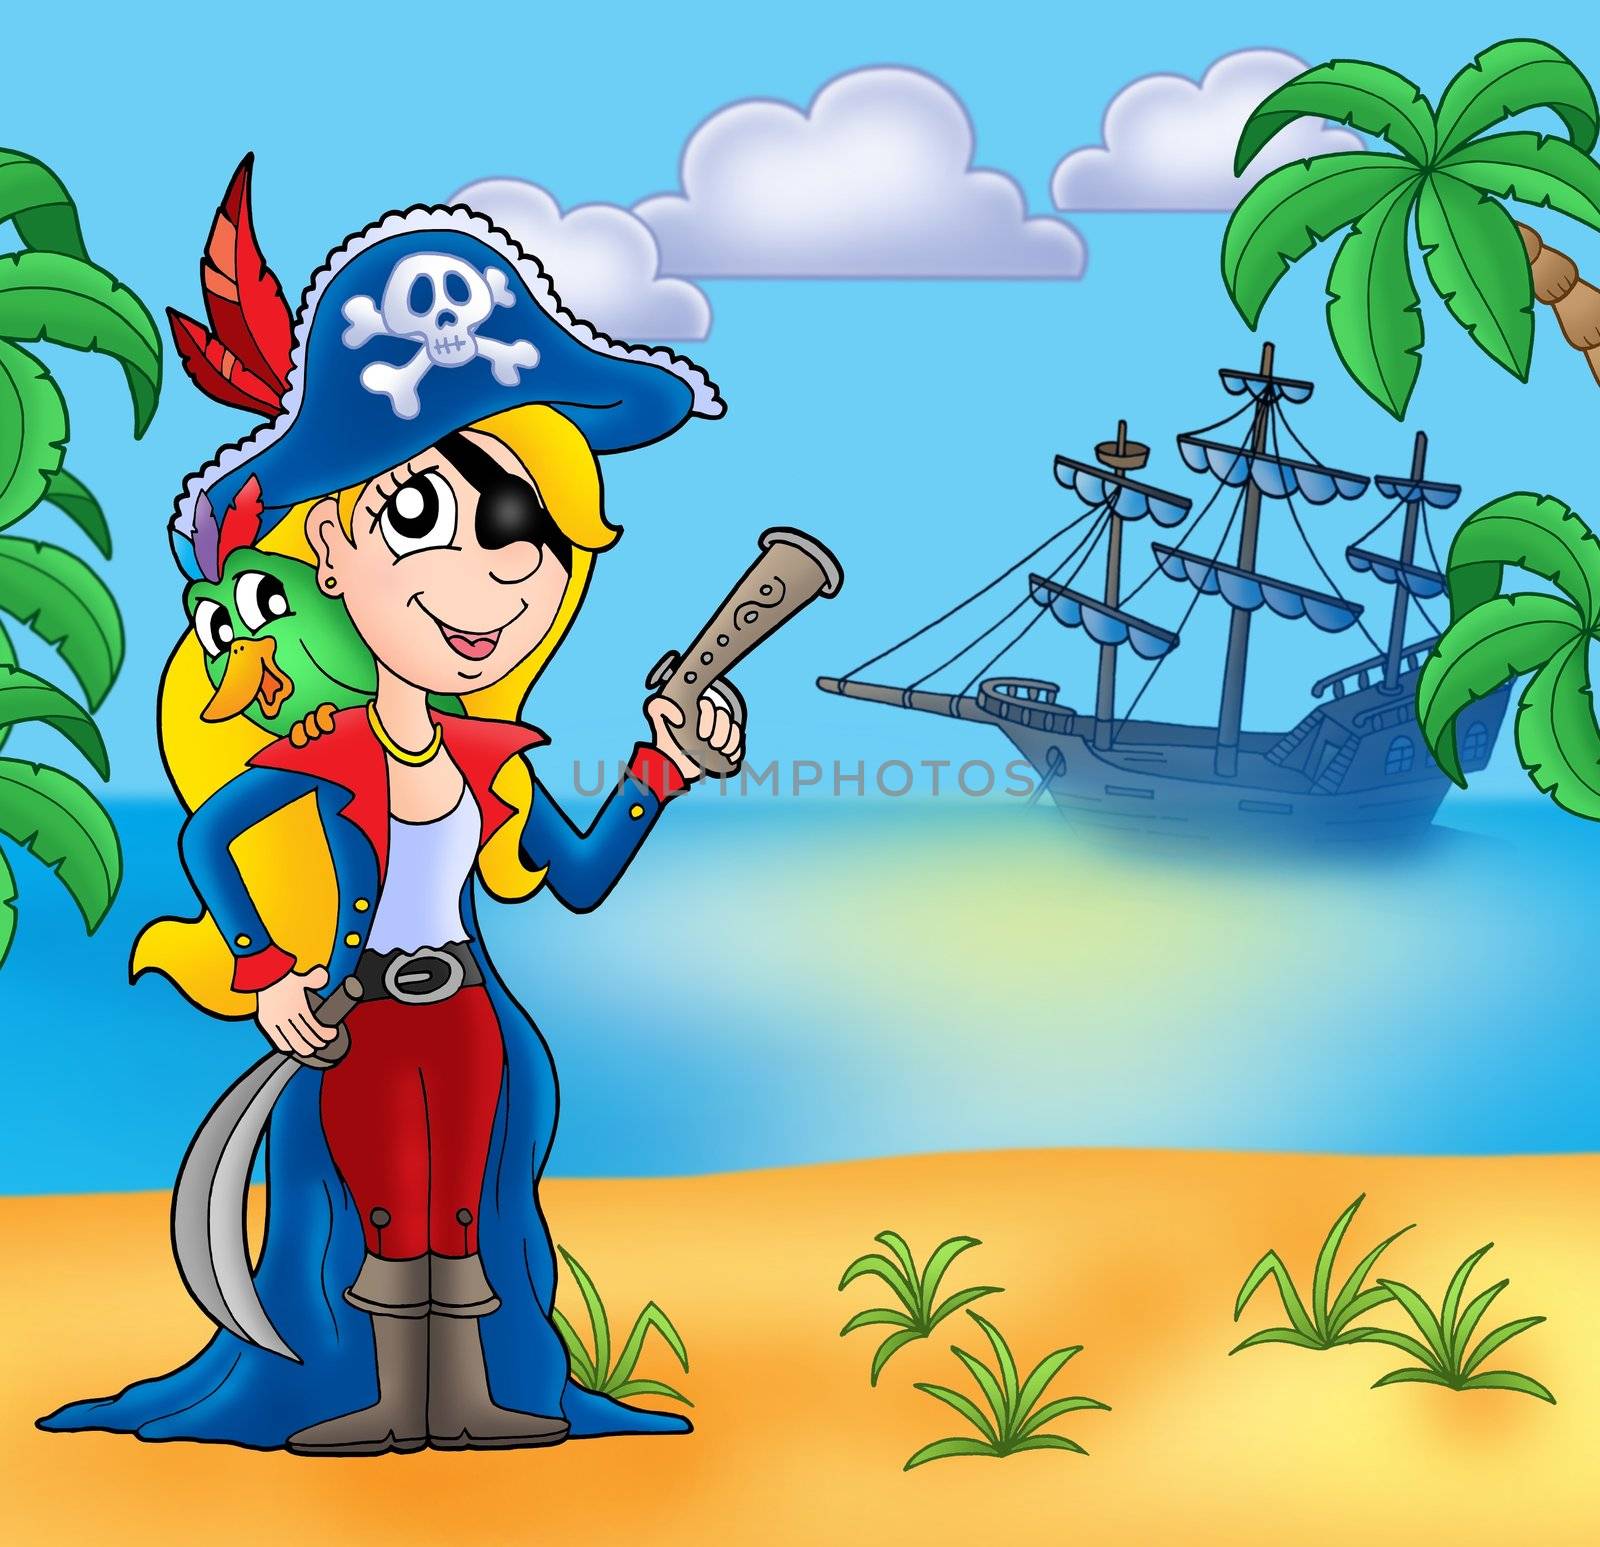 Pirate girl on beach 2 - color illustration.